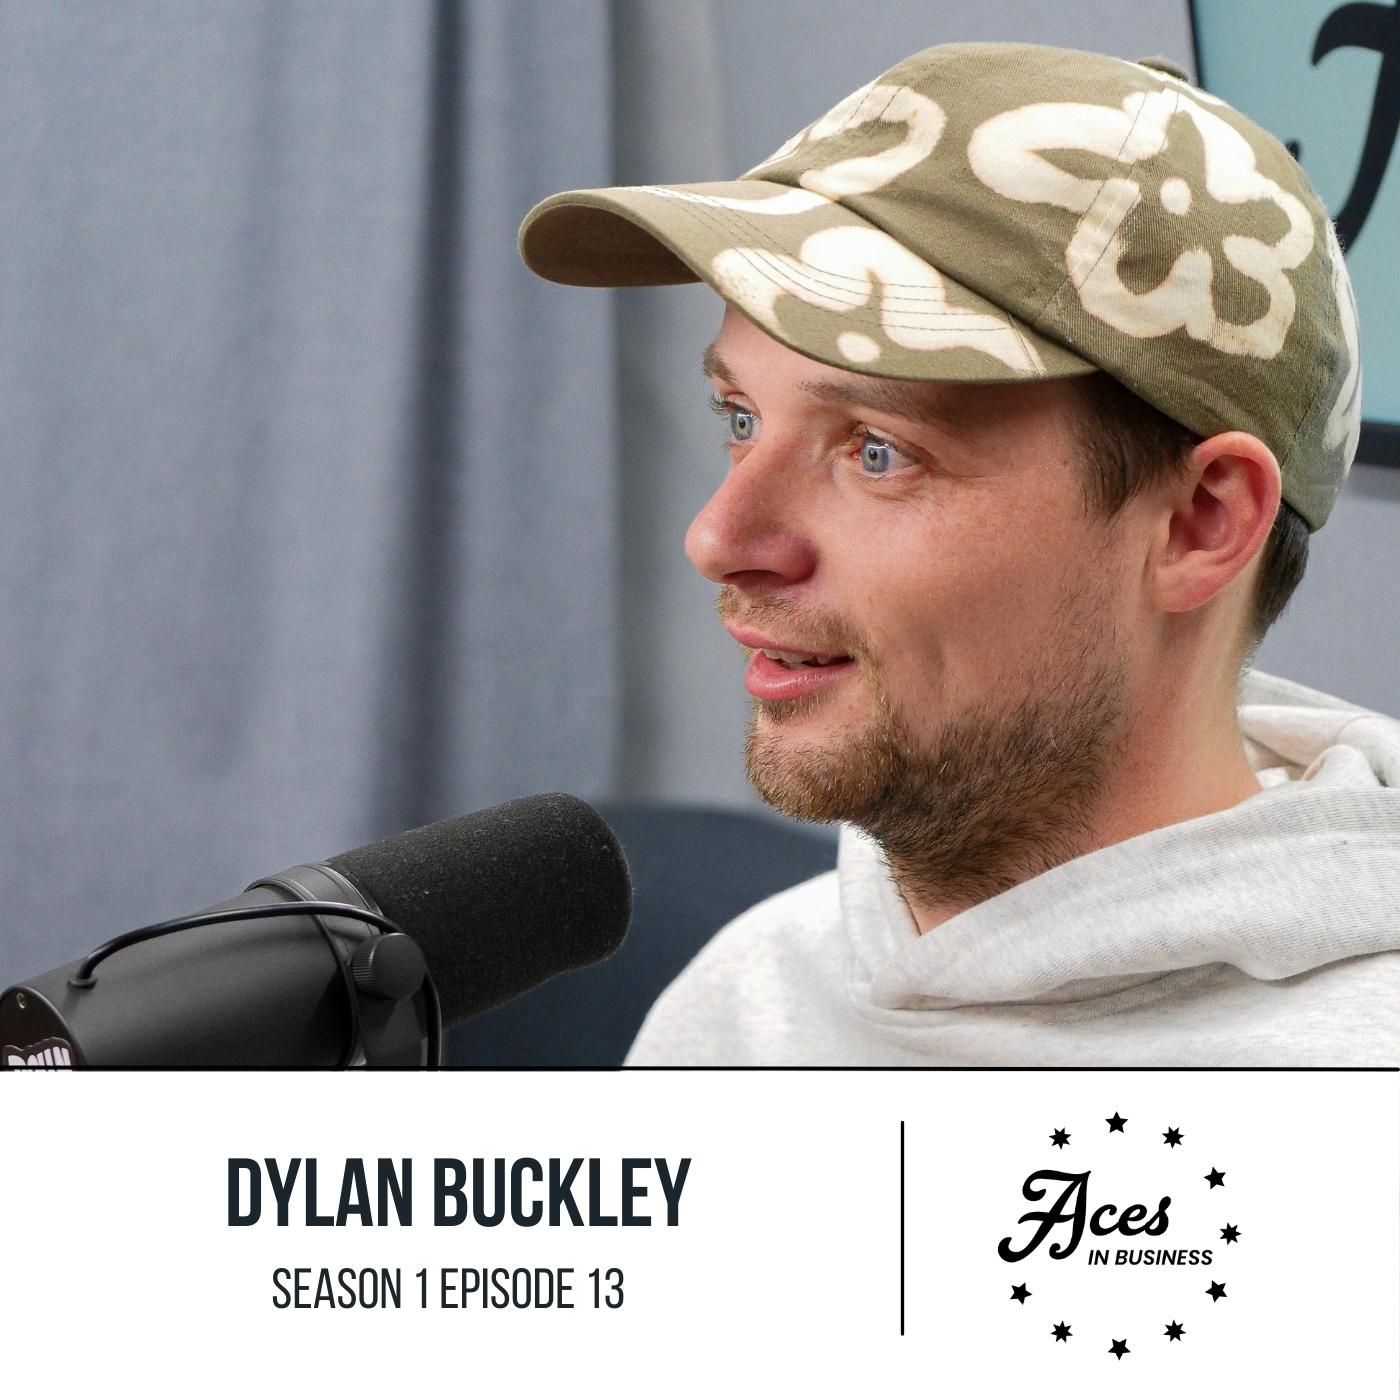 Aces in Business with the Founder & Director of Producey, Dylan Buckley.